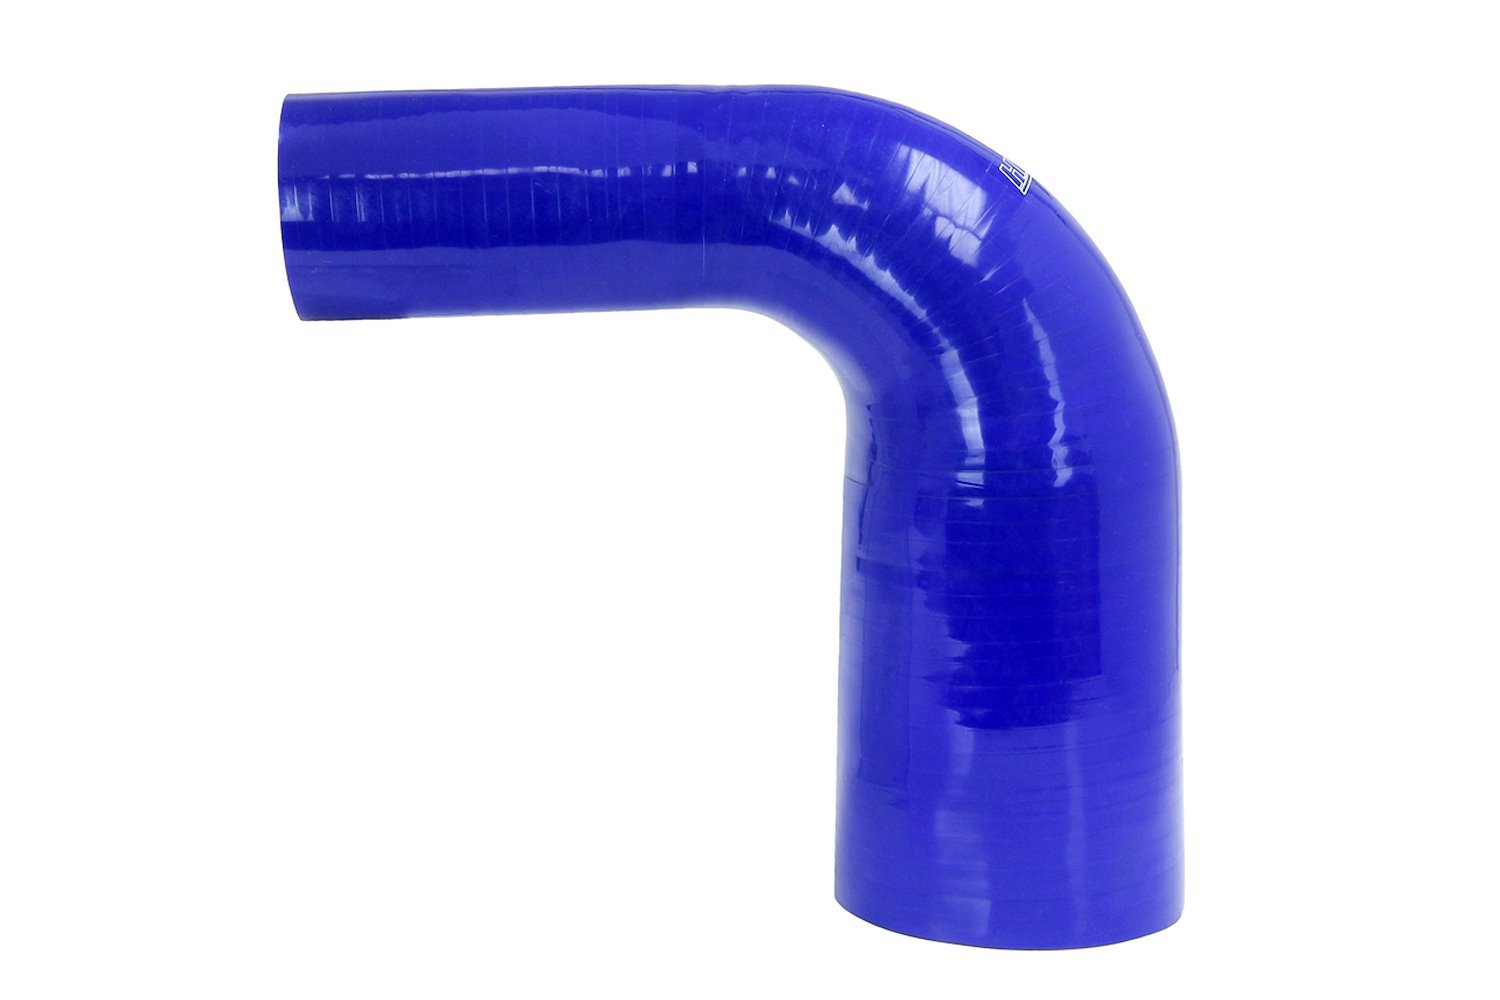 HTSER90-225-275-BLUE Silicone 90-Degree Elbow Hose, High-Temp 4-Ply Reinforced, 2-1/4 in. - 2-3/4 in. ID, Blue